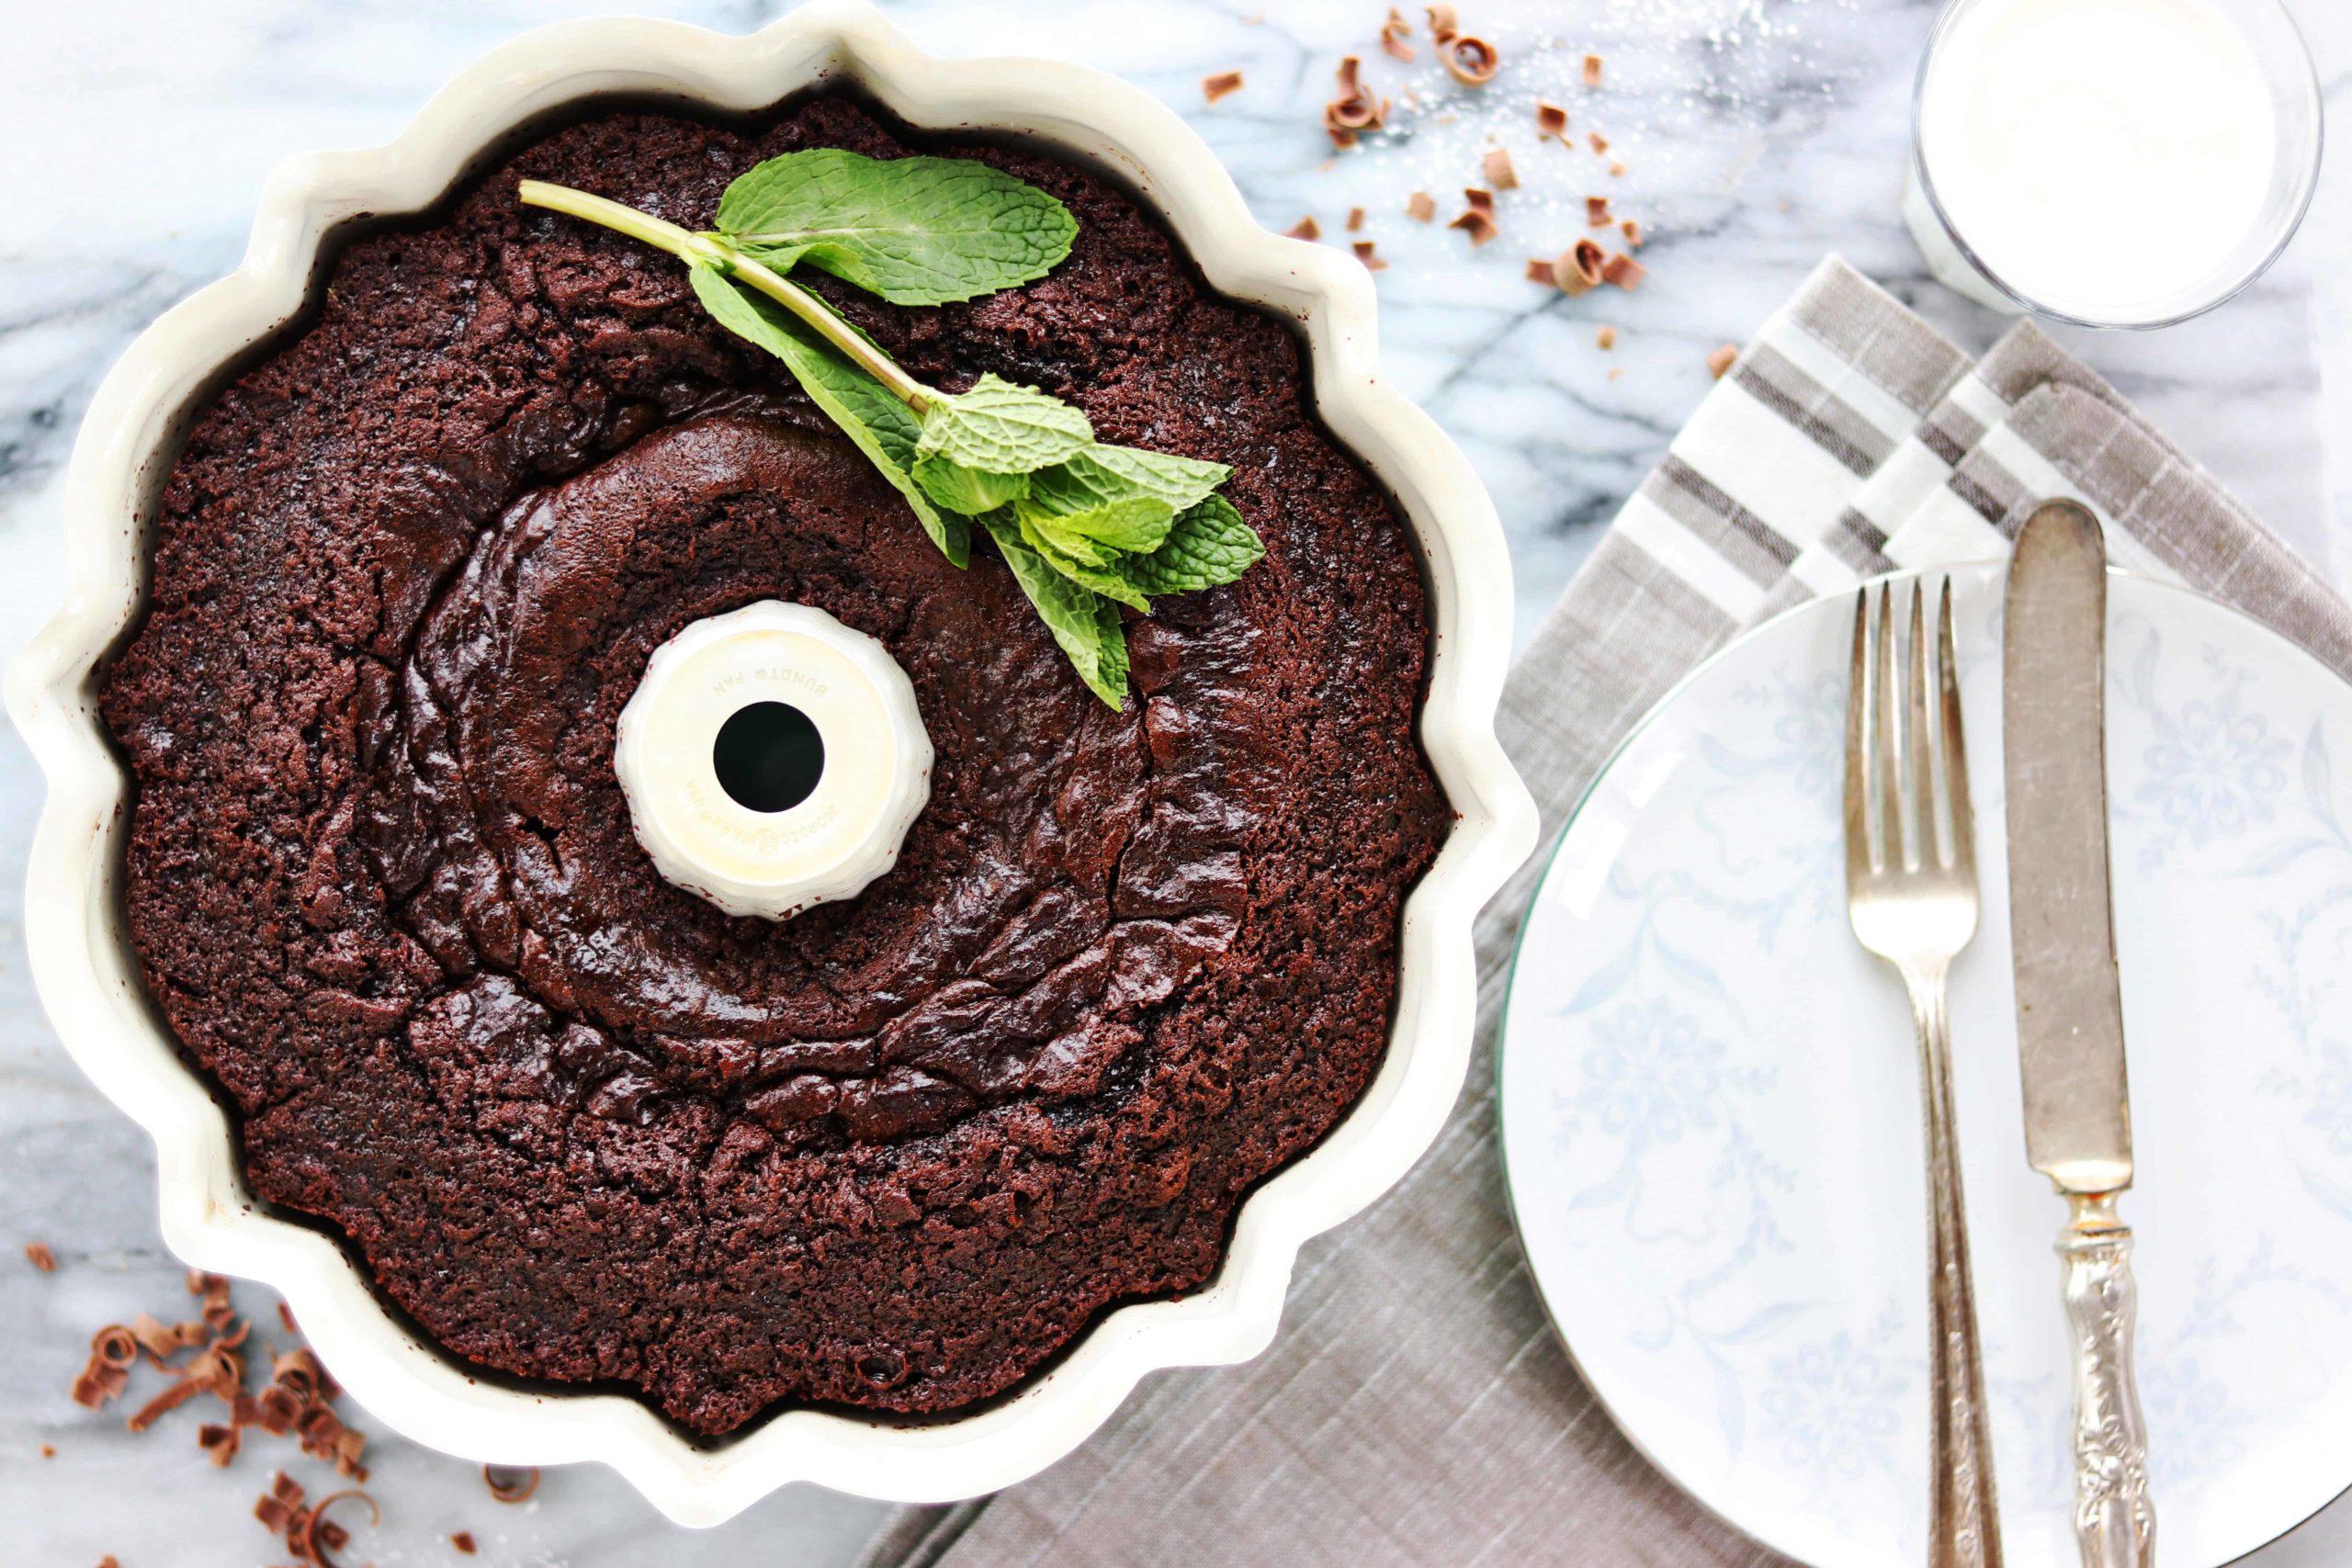 Best Homemade Chocolate Bundt Cake with Cream Cheese Filling